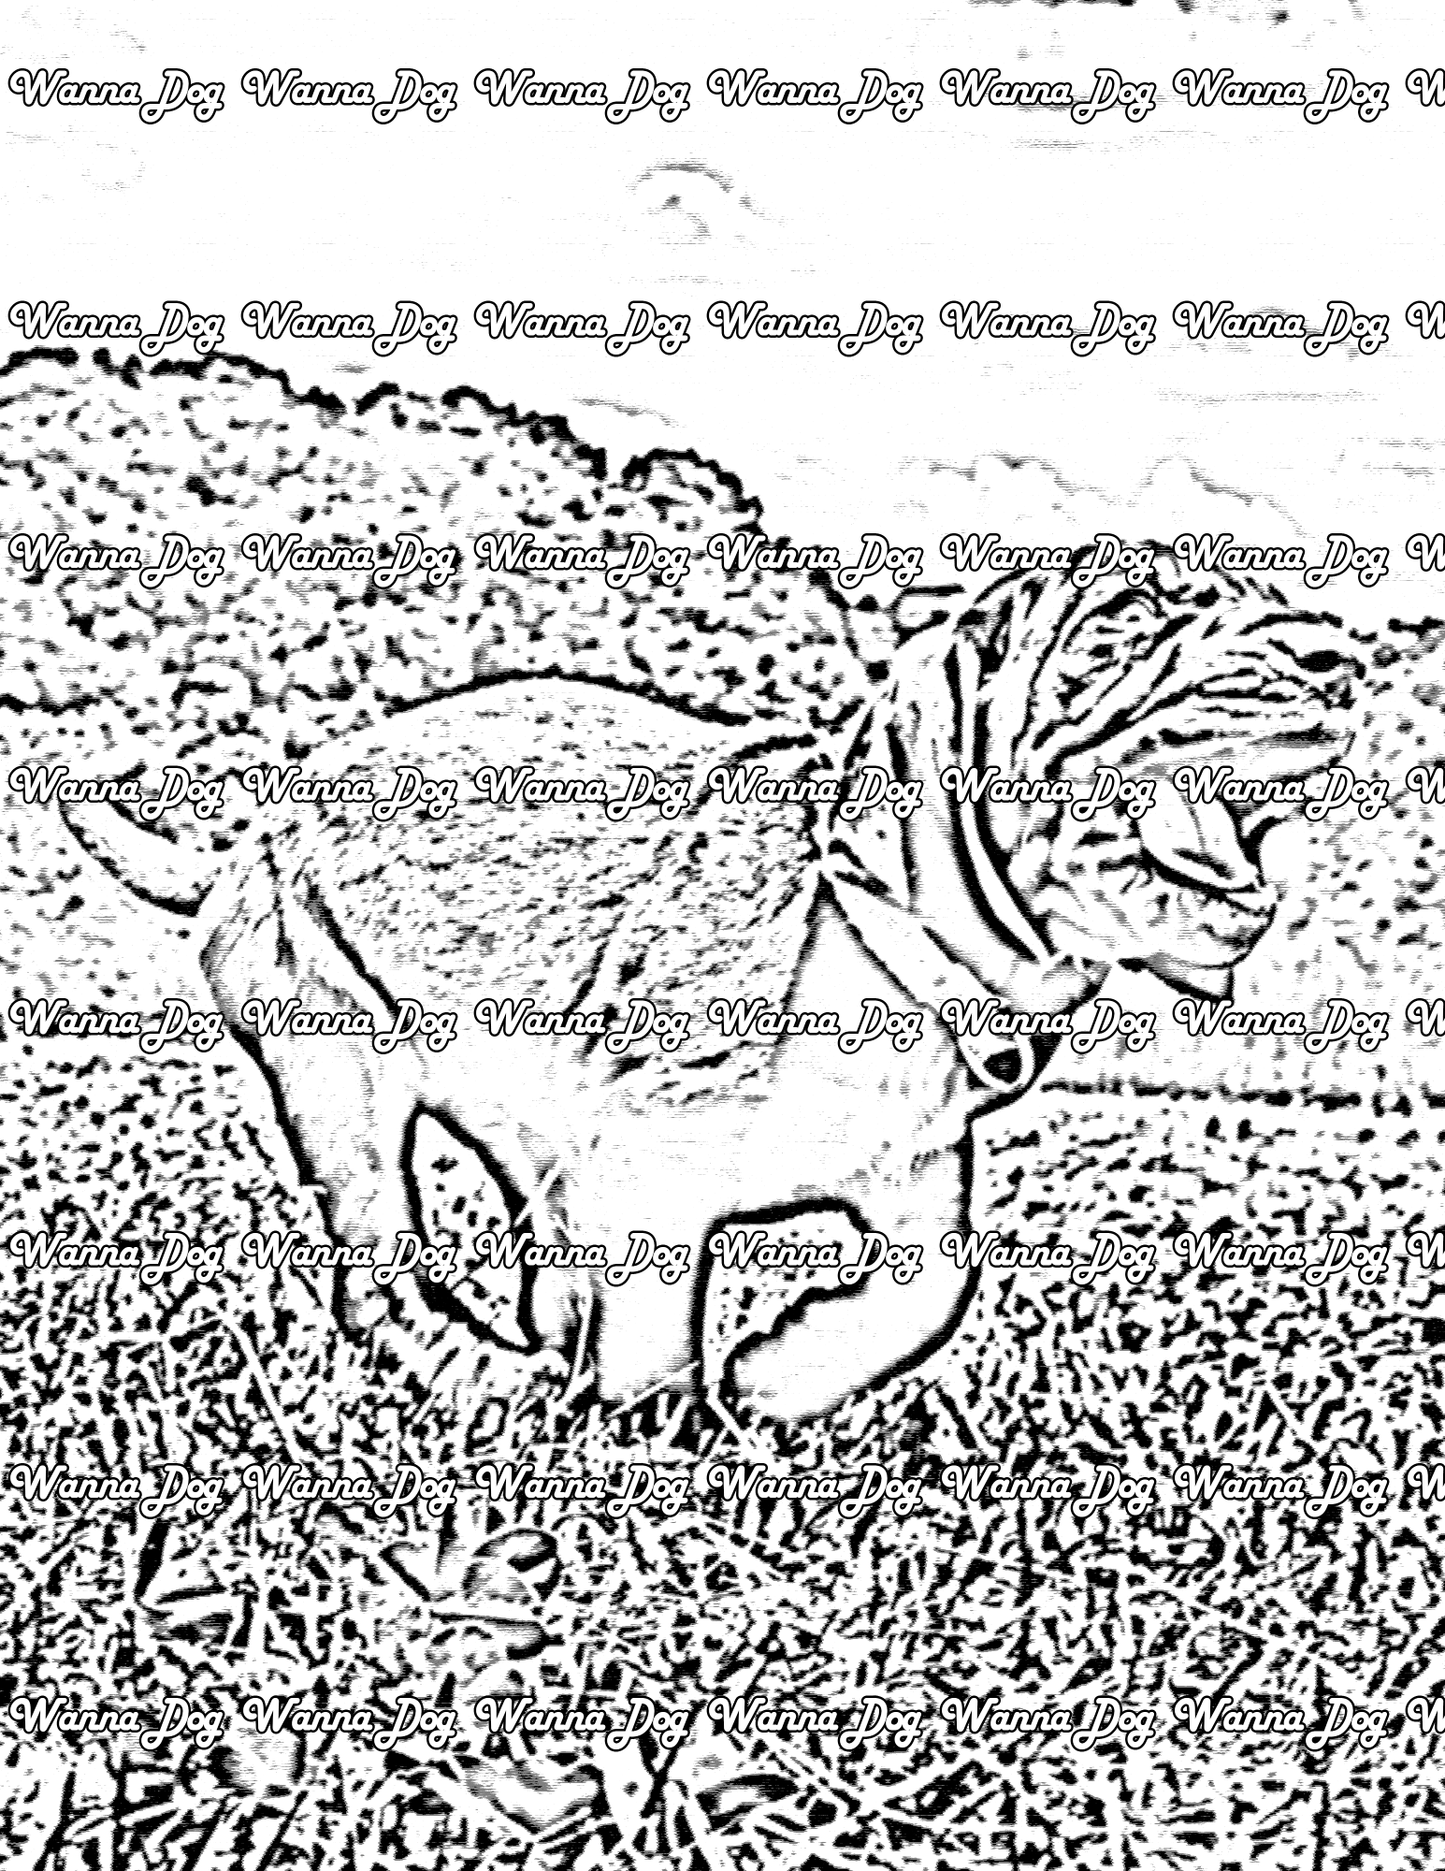 Bloodhound Coloring Page of a Bloodhound running in grass